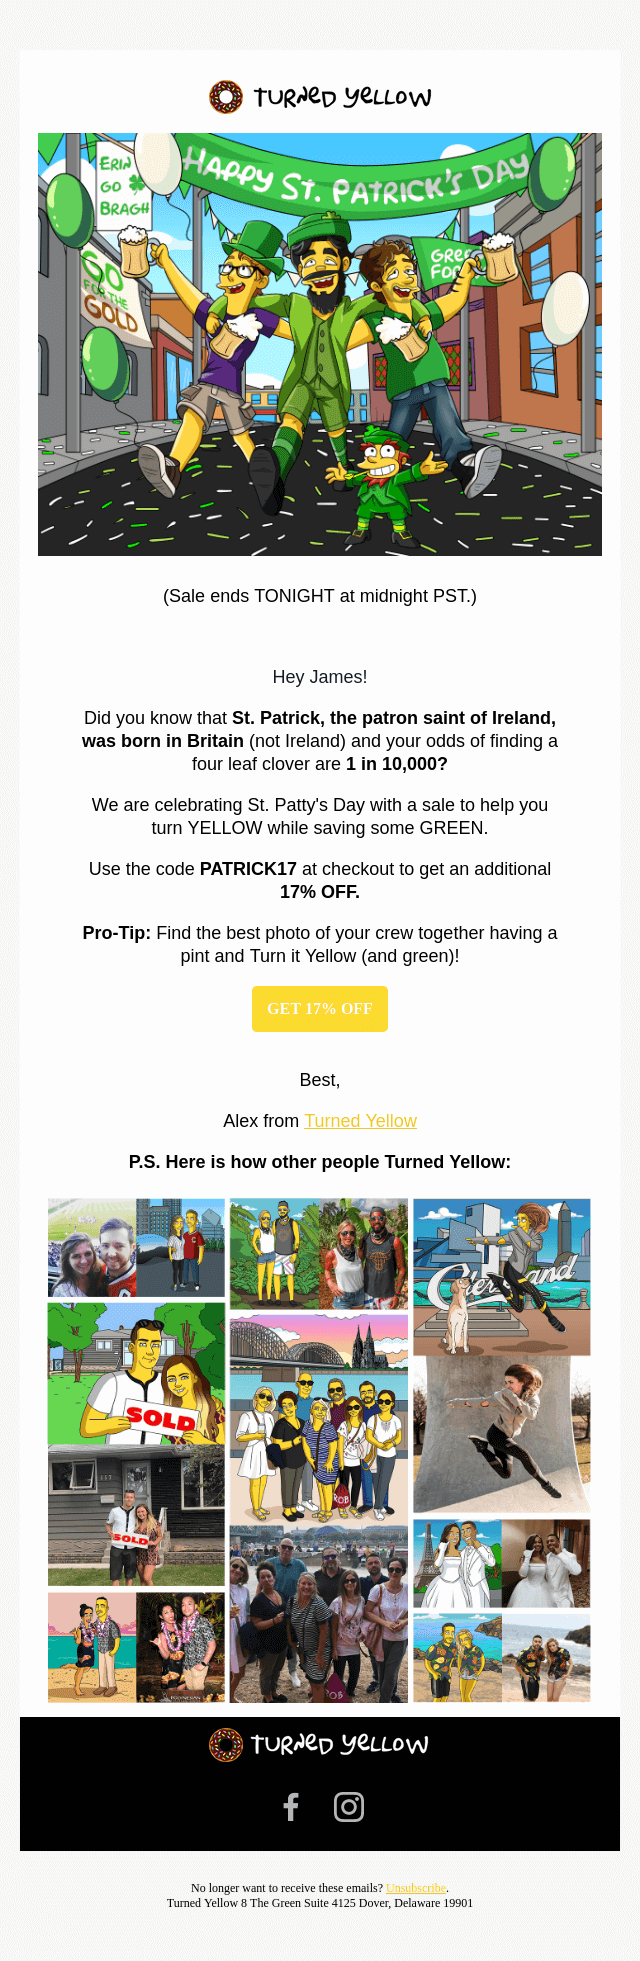 Image shows a St. Patrick’s Day email campaign from Turned Yellow